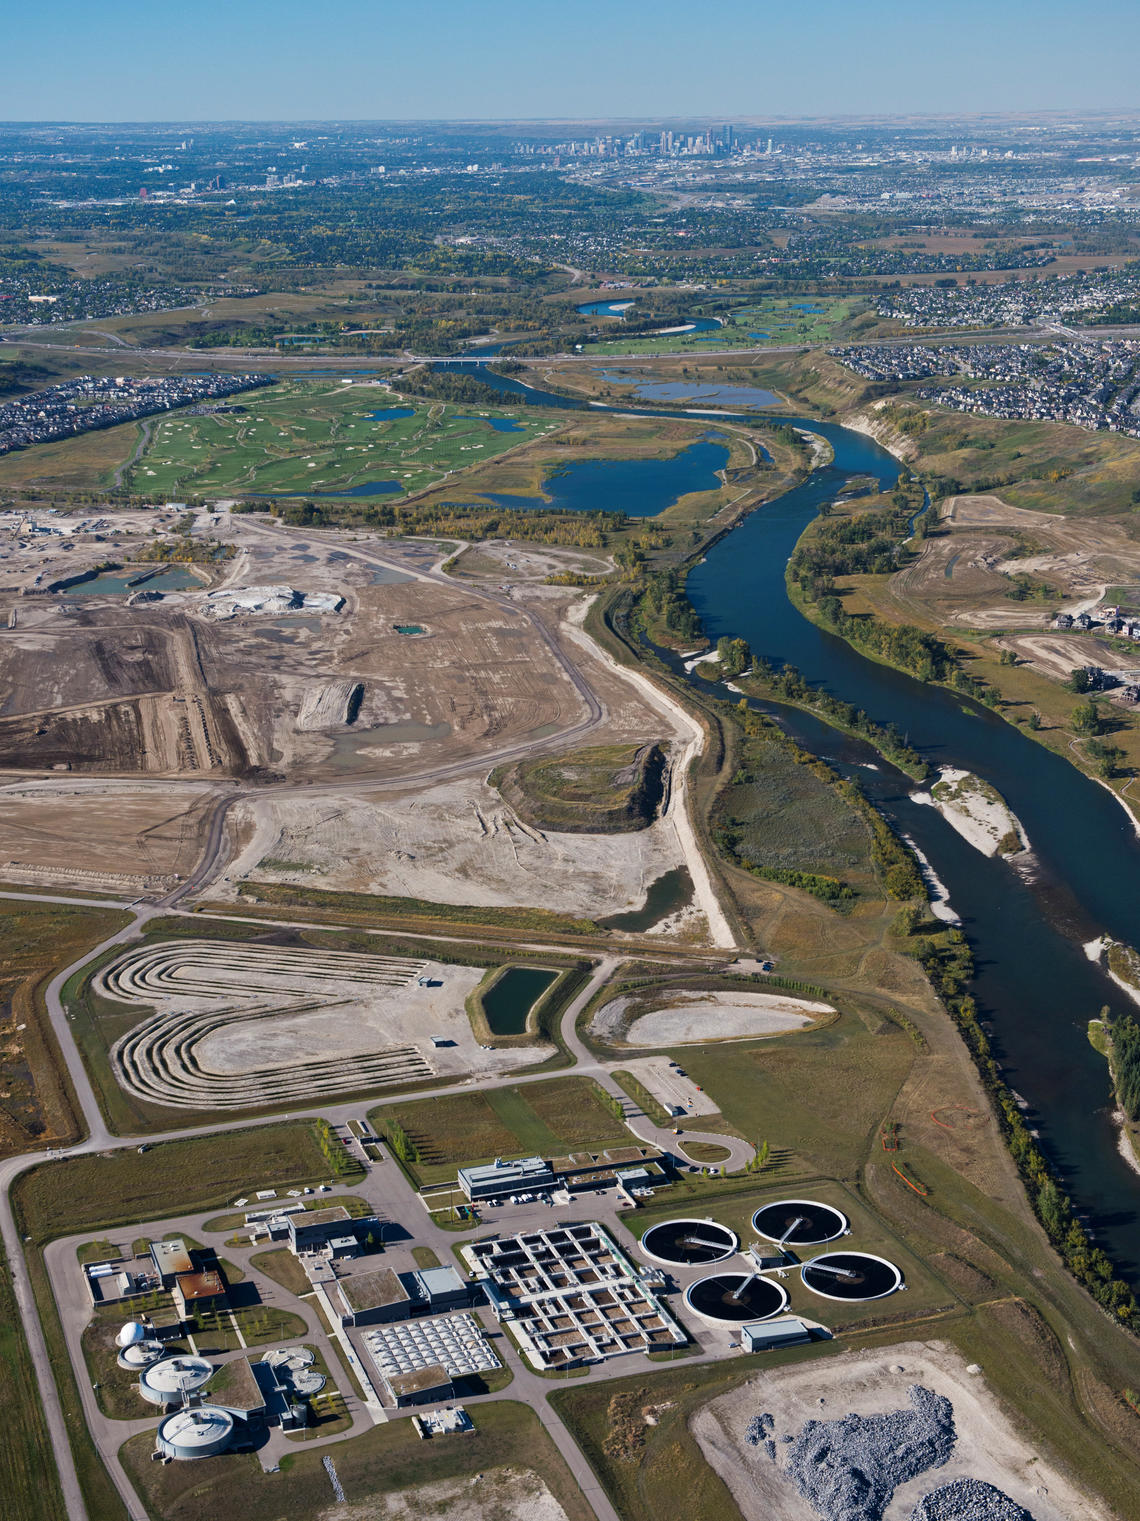 The Advancing Canadian Wastewater Assets research facility in southeast Calgary brings together a multidisciplinary approach across several areas of expertise to address water issues.